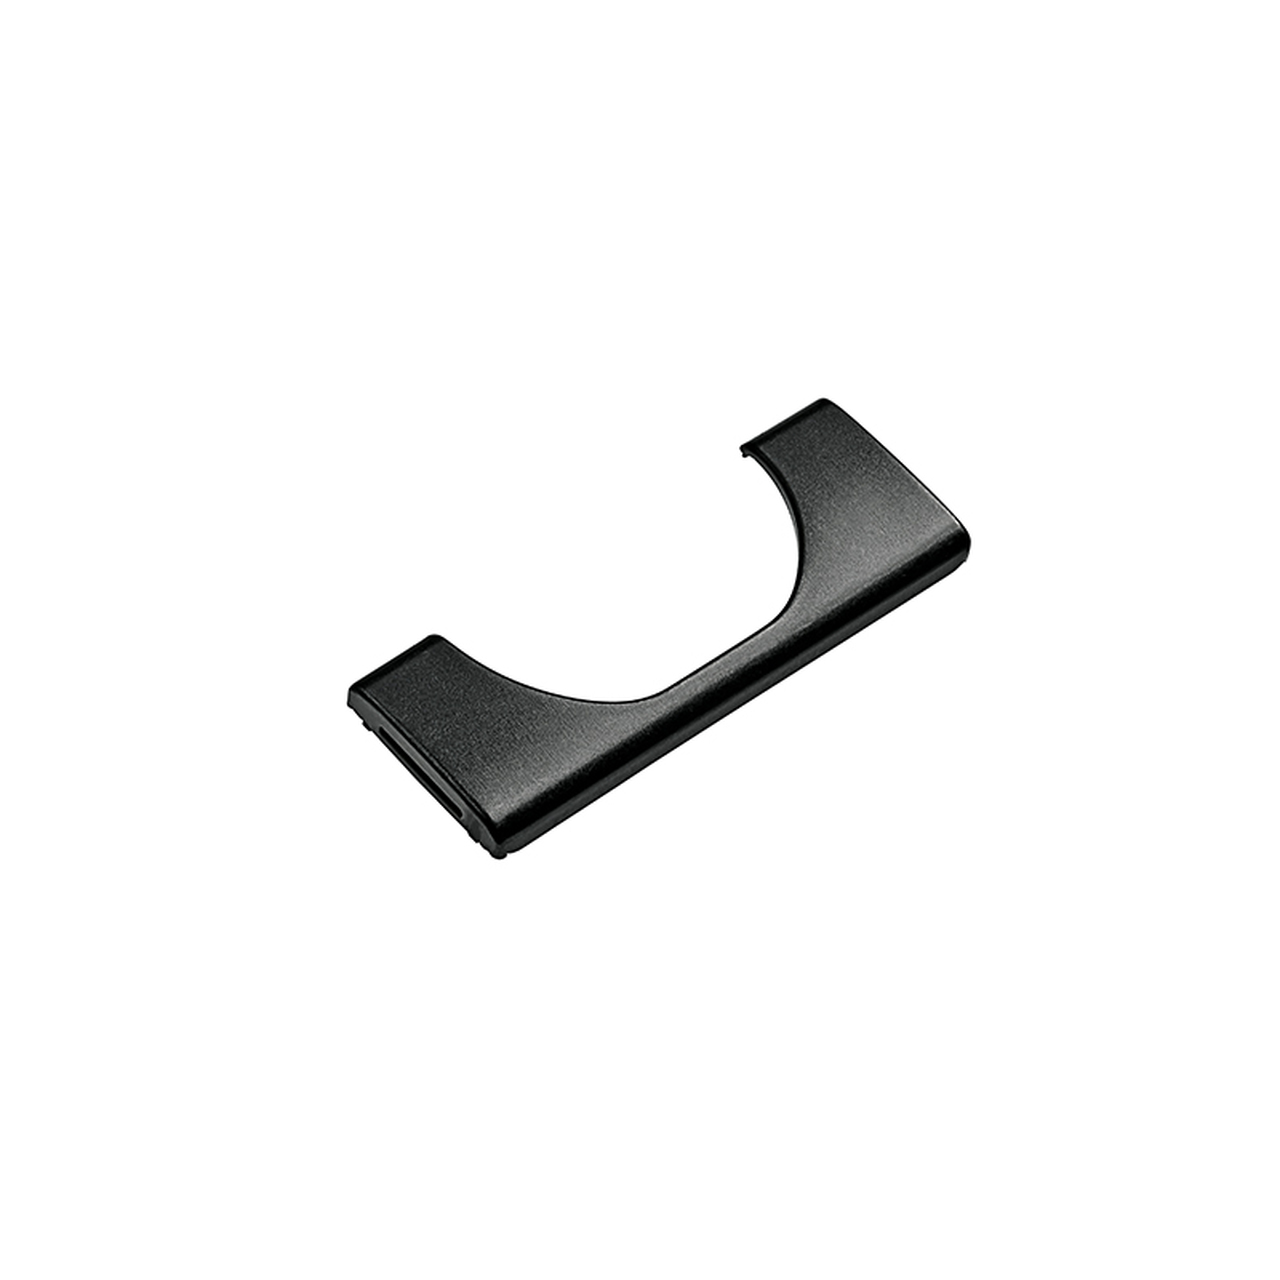 Clip Top Hinge Boss Cover Cap for use with 107°, 110° & Profile Blumotion Hinges - Onyx Black